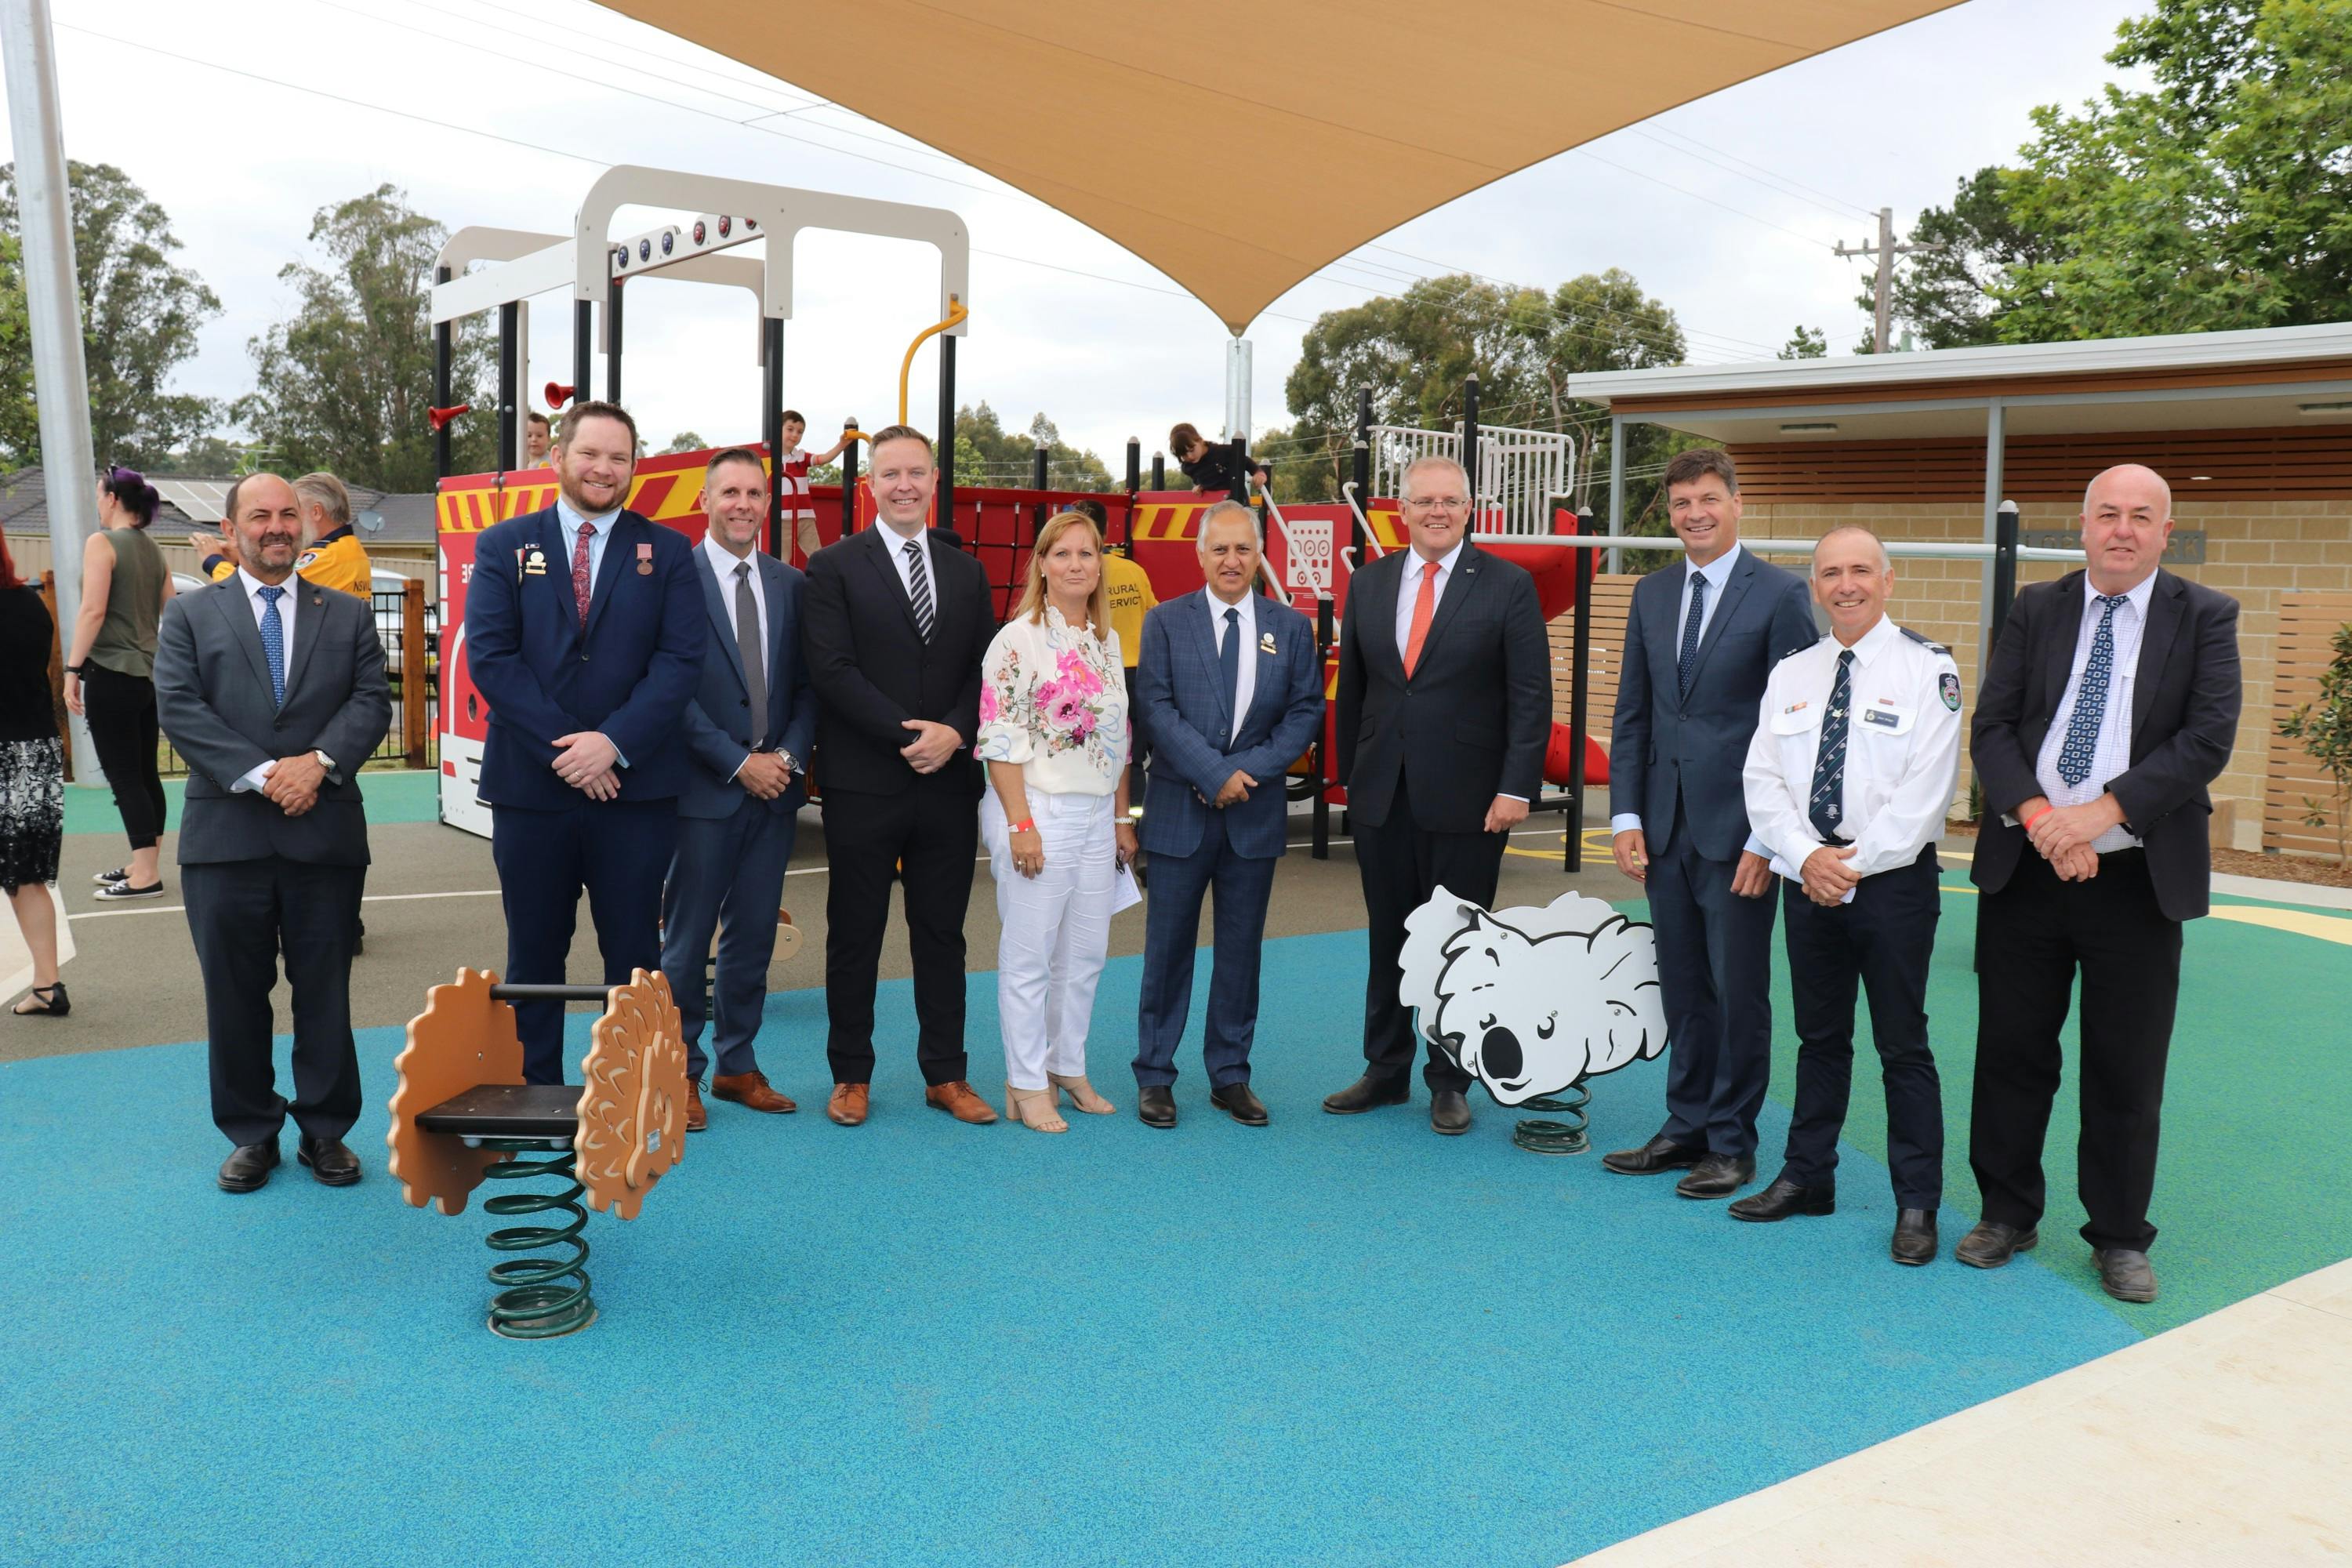 Wollondilly Mayor, CEO and Councillors, with the Hon. Louis Amato, Member of the Legislative Council, the Prime Minister, and Federal member the Hon. Angus Taylor MP